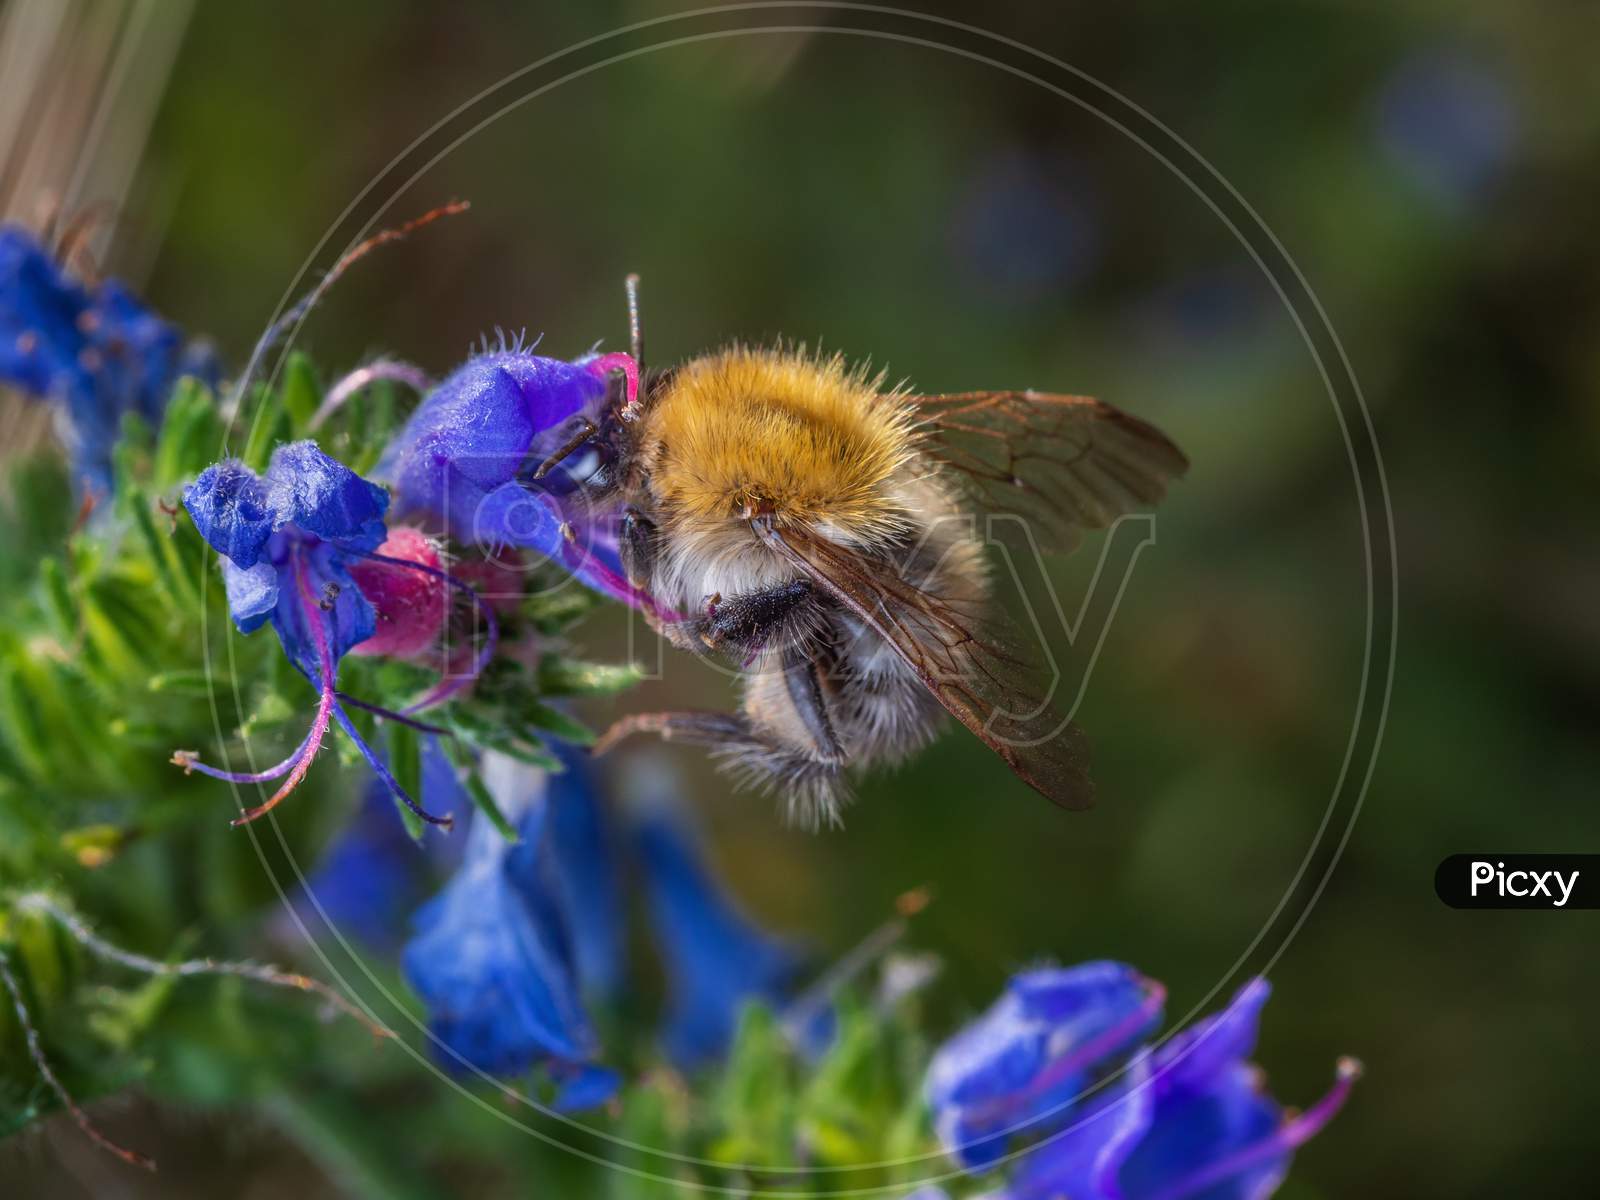 Close-Up Of Western Honey Bee Extracting Nectar From Blue Viper'S Bugloss Flowers.